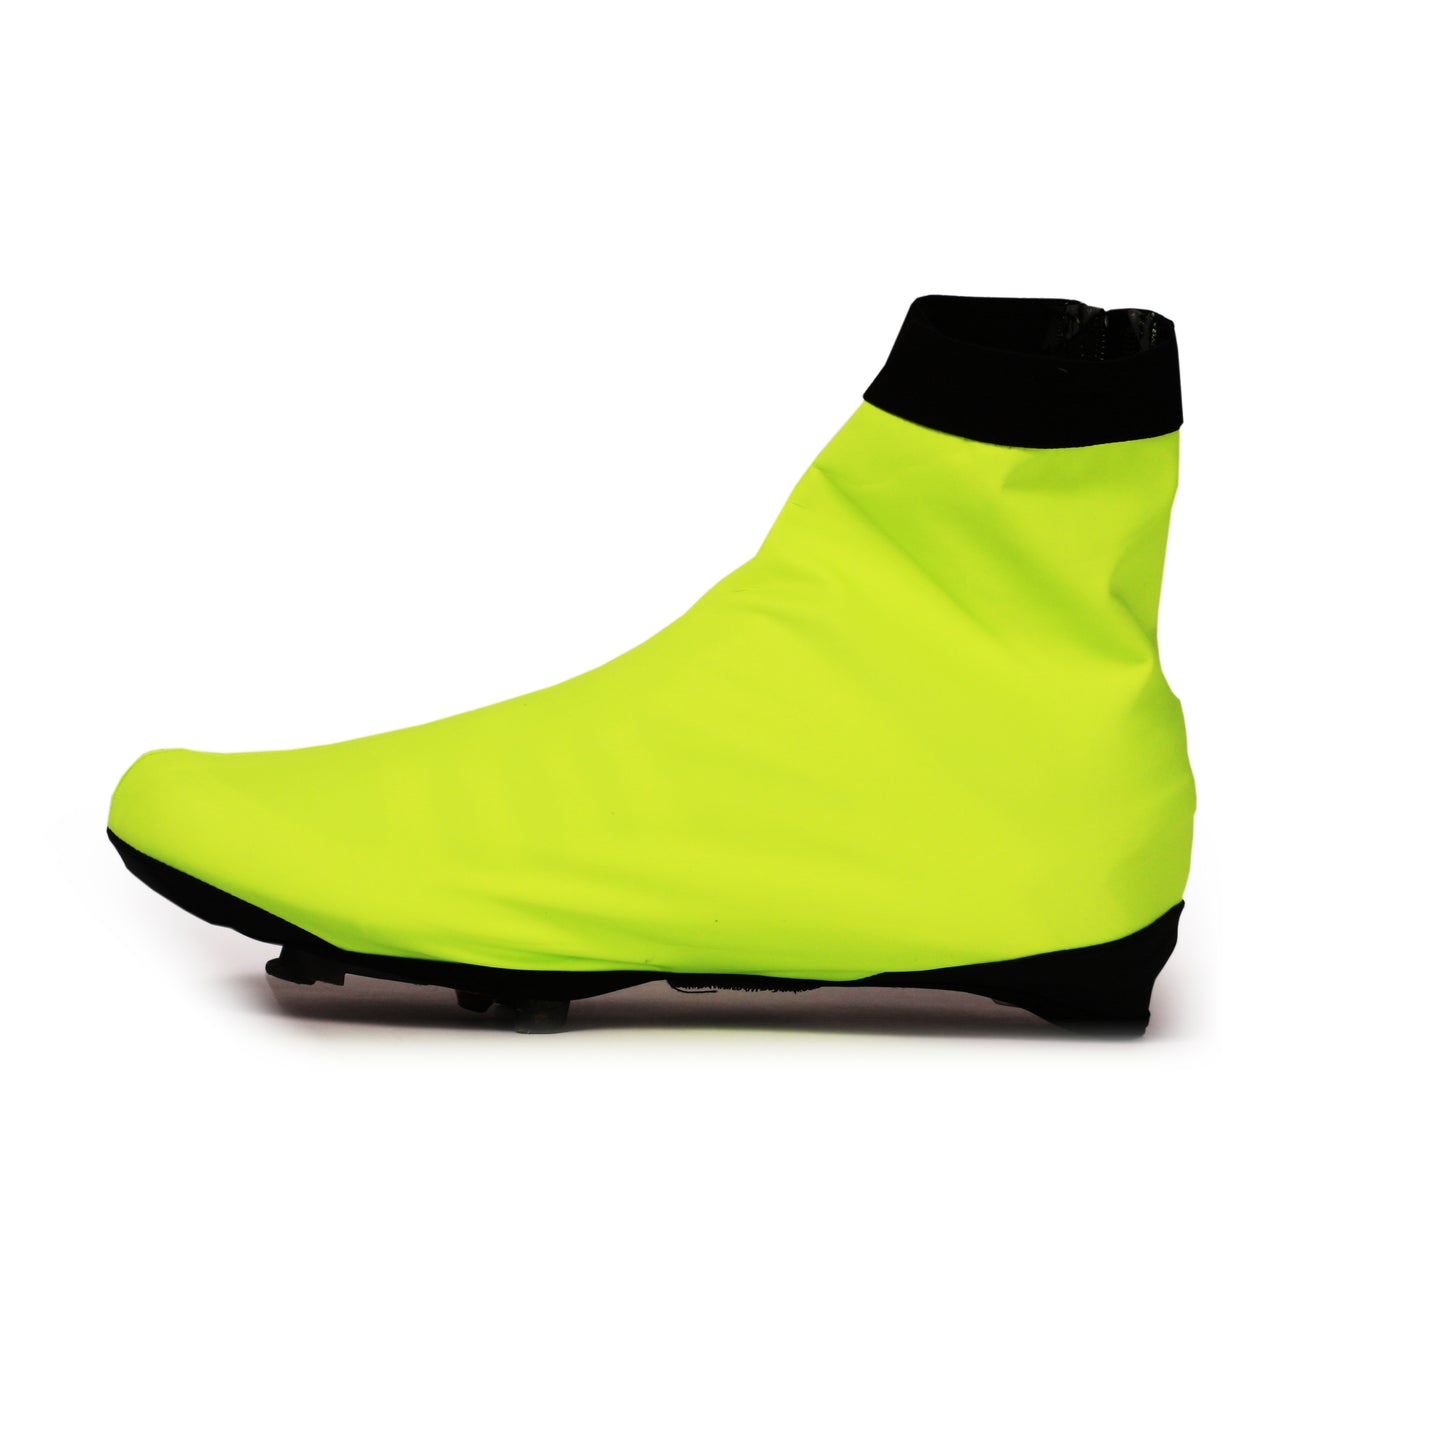 BSP-05 Cycling overshoes, Warm and water-repellent